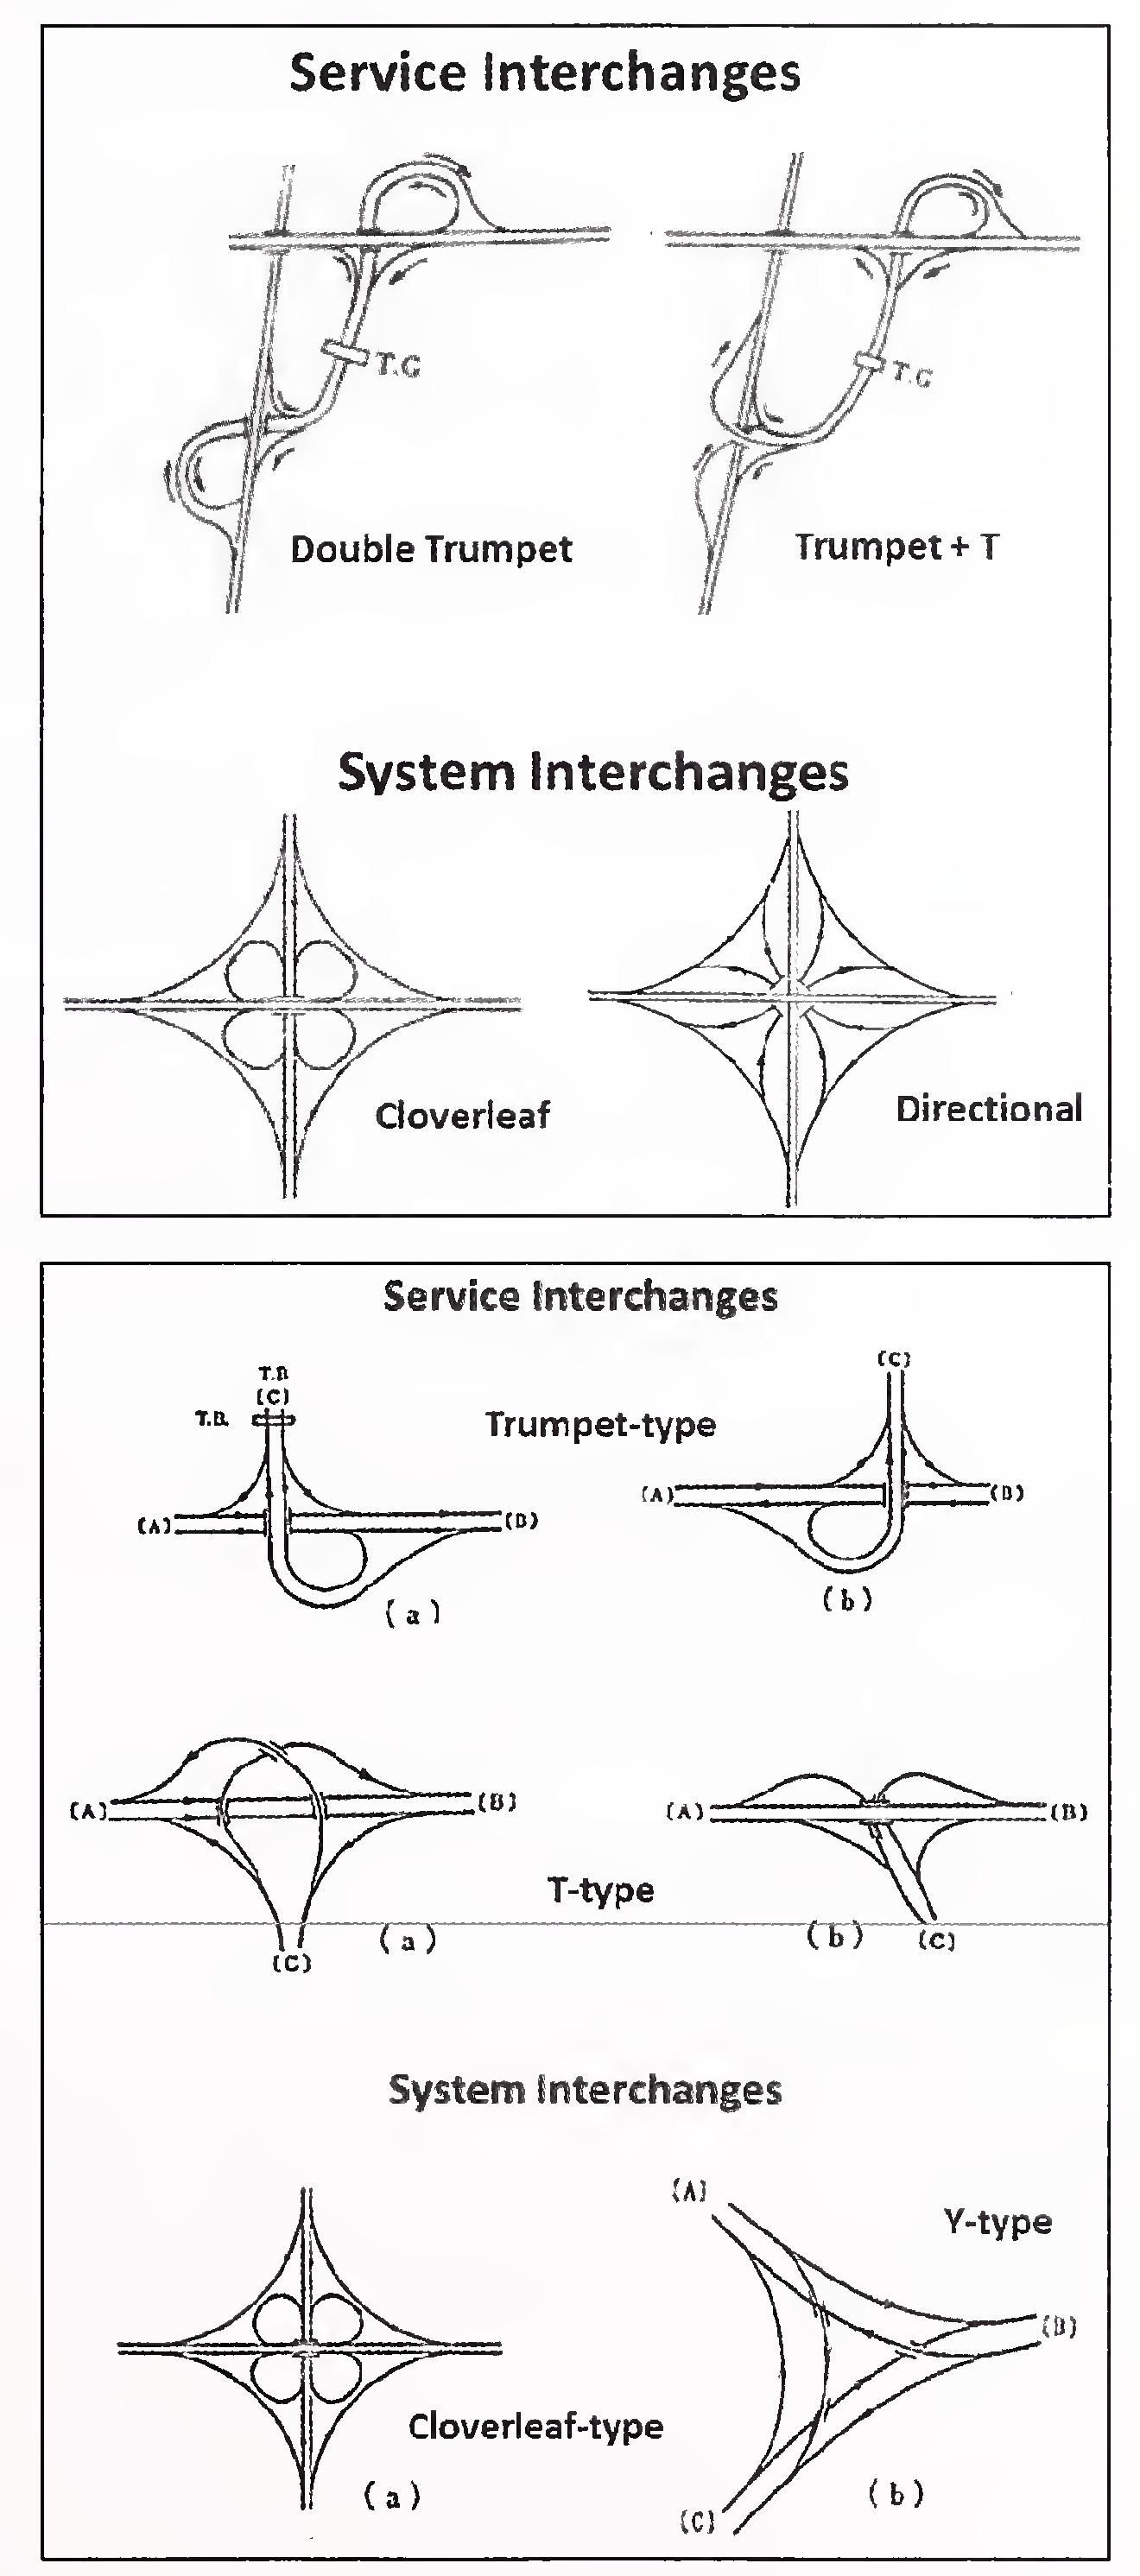 Fig. 3.1 Service and System Interchanges